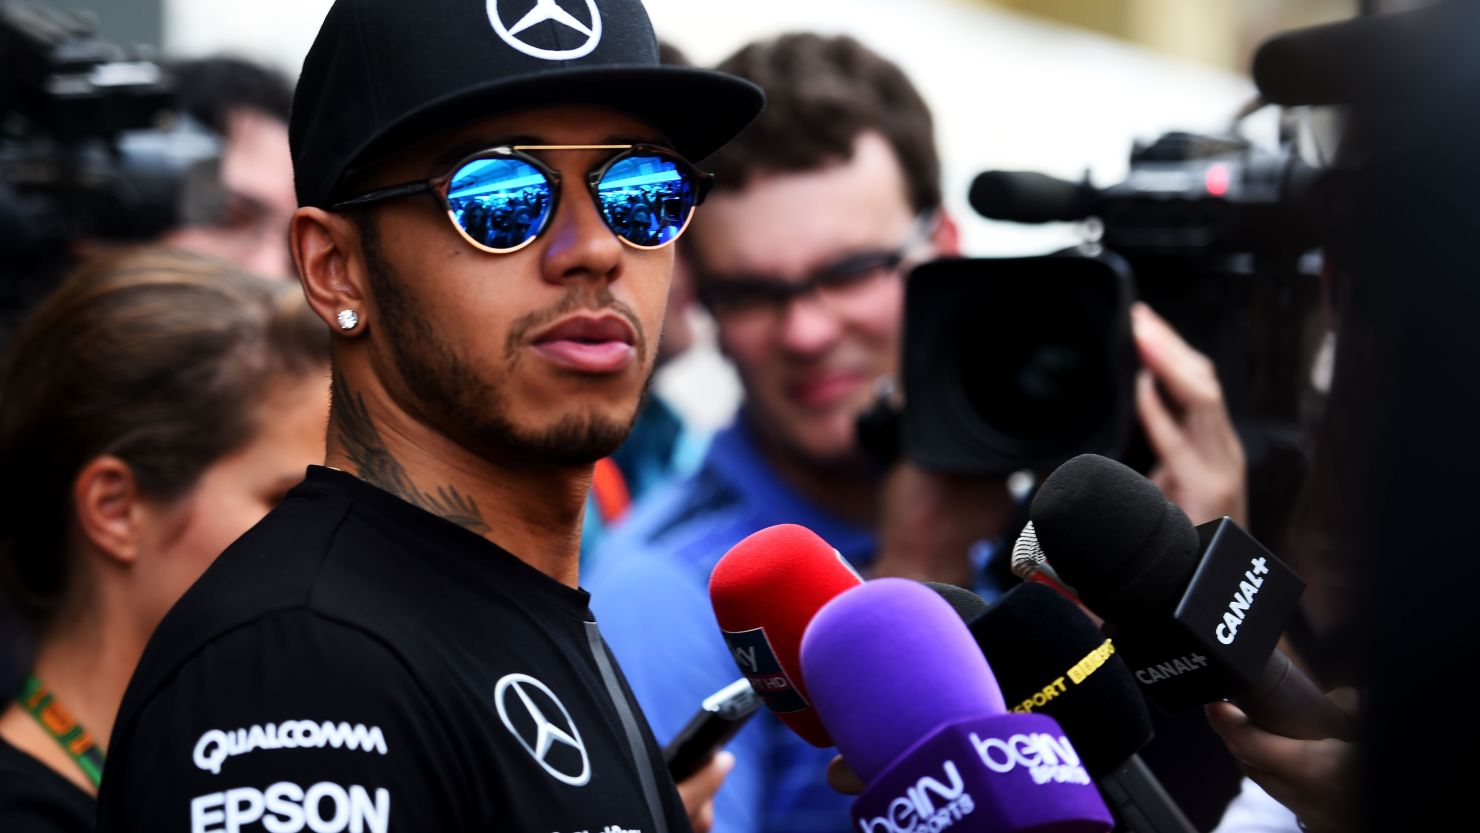 Lewis Hamilton faced the media in Brazil just three days after crashing his car in Monaco.